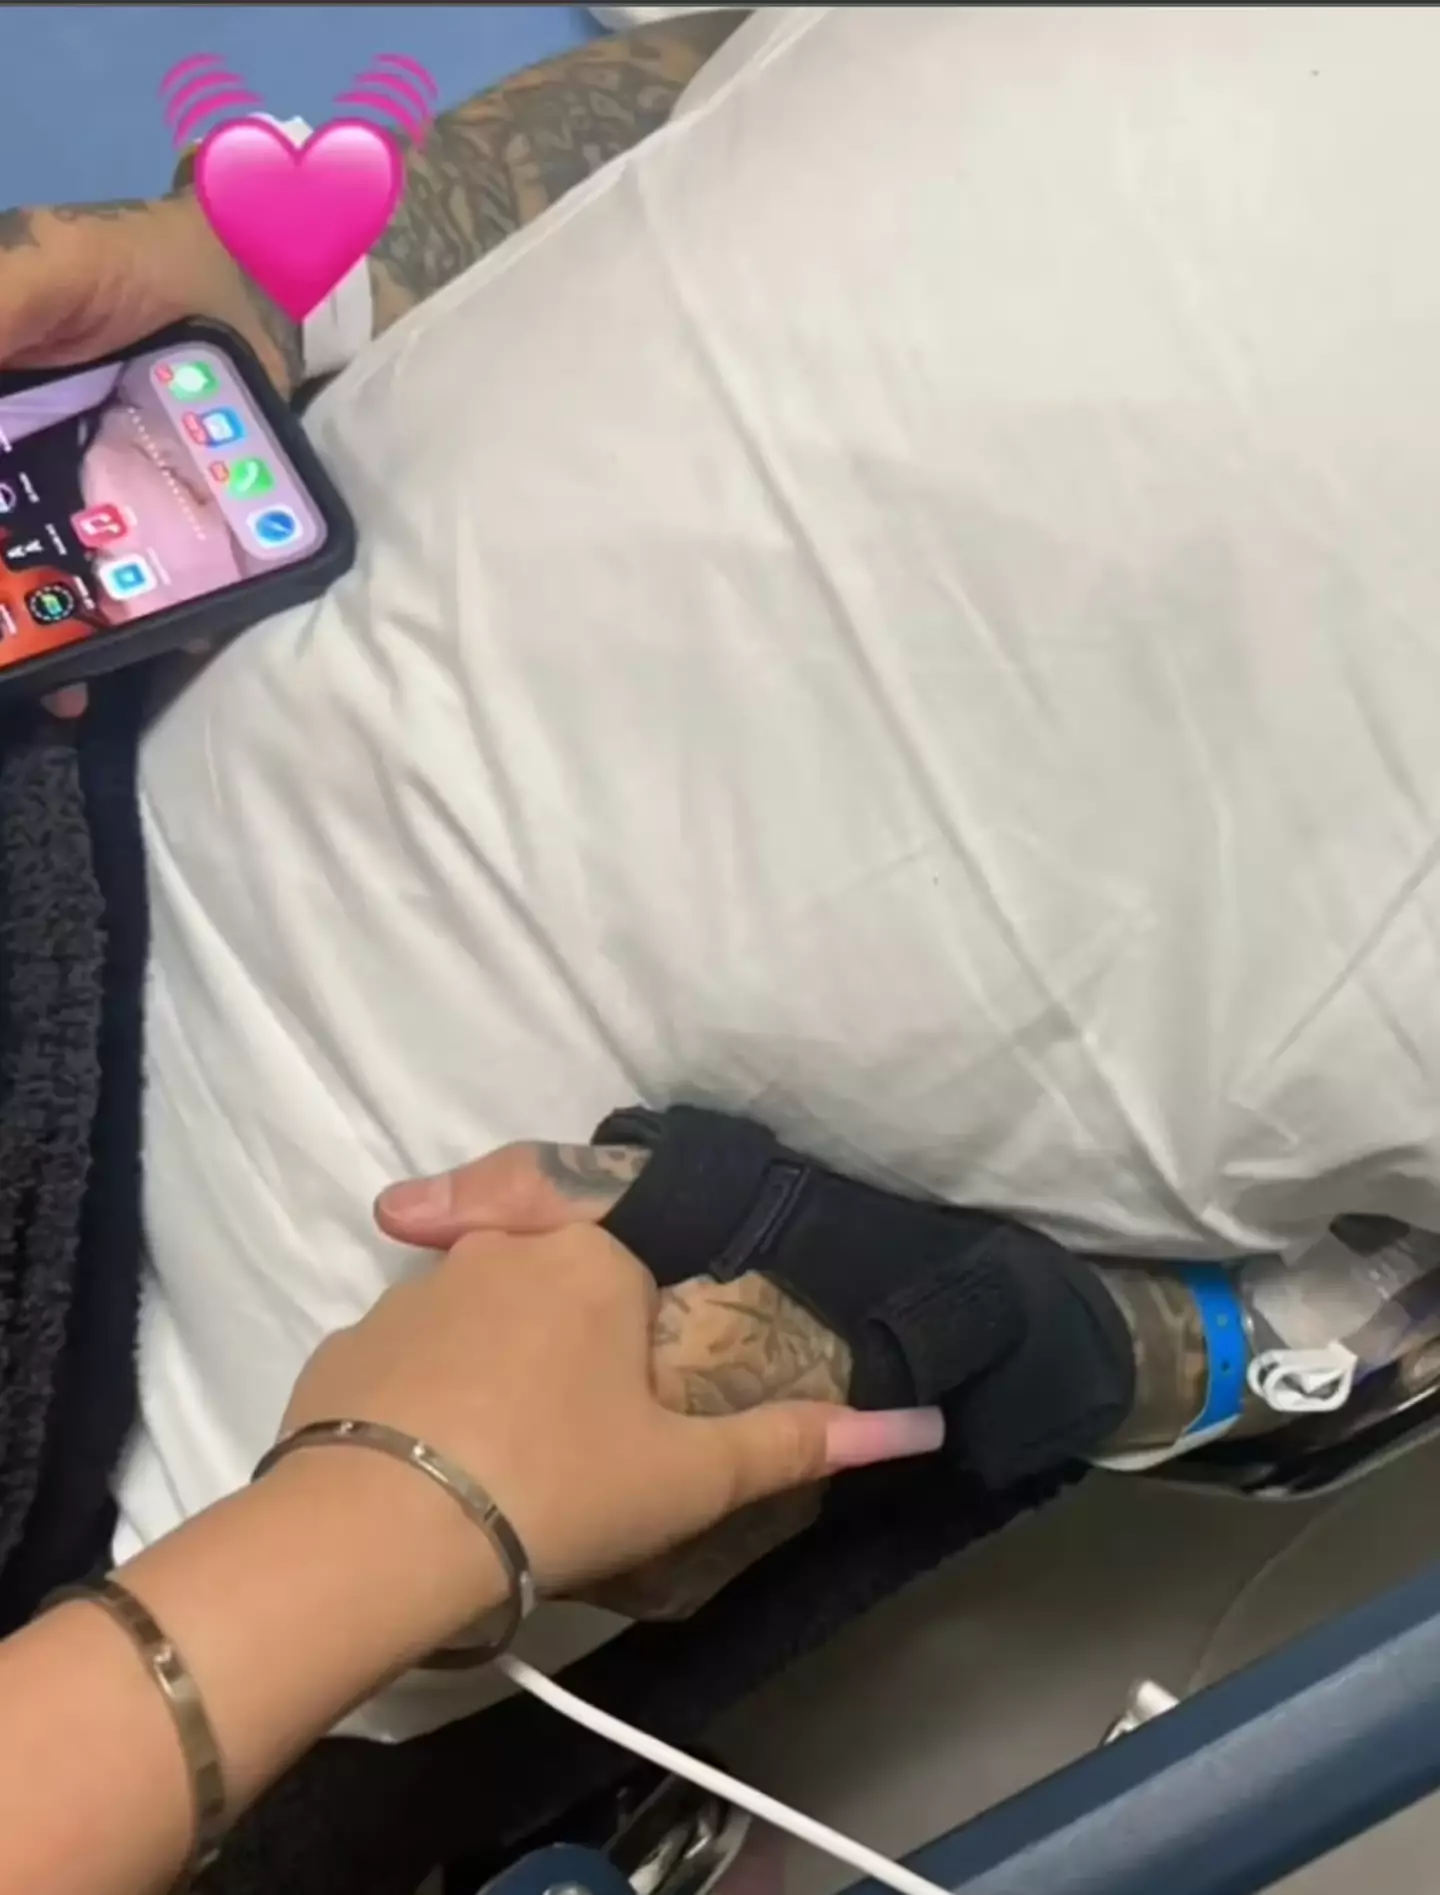 Travis Barker's daughter shared a photo of the musician in hospital on her TikTok.